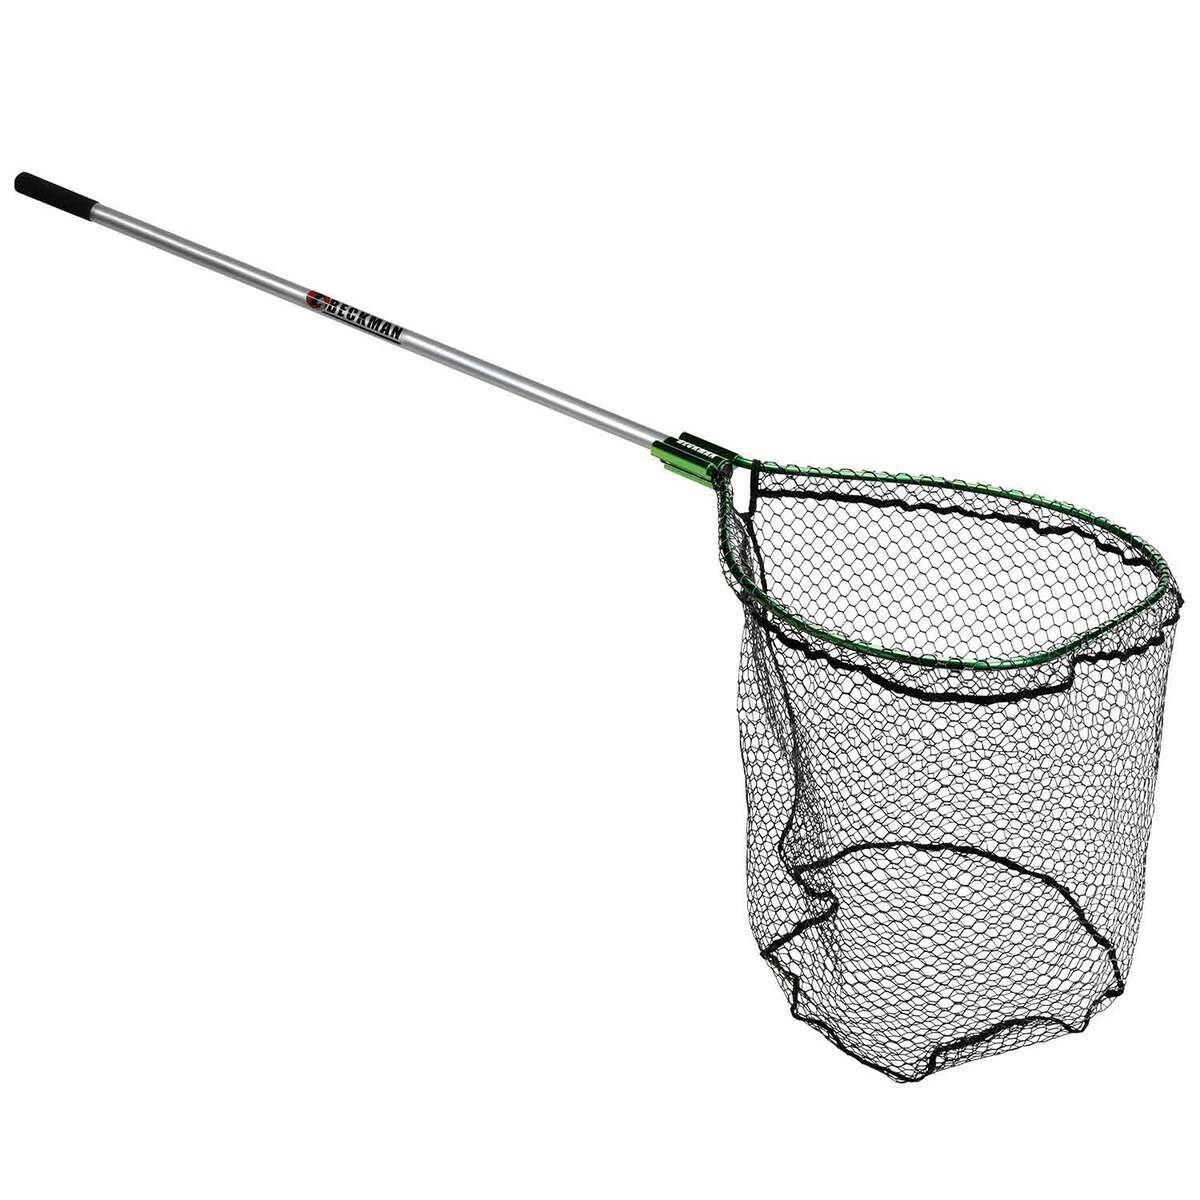  PLUSINNO Fishing Net Fish Landing Net, Foldable Collapsible  Telescopic Pole Handle, Durable Nylon Material Mesh, Safe Fish Catching or  Releasing : Sports & Outdoors